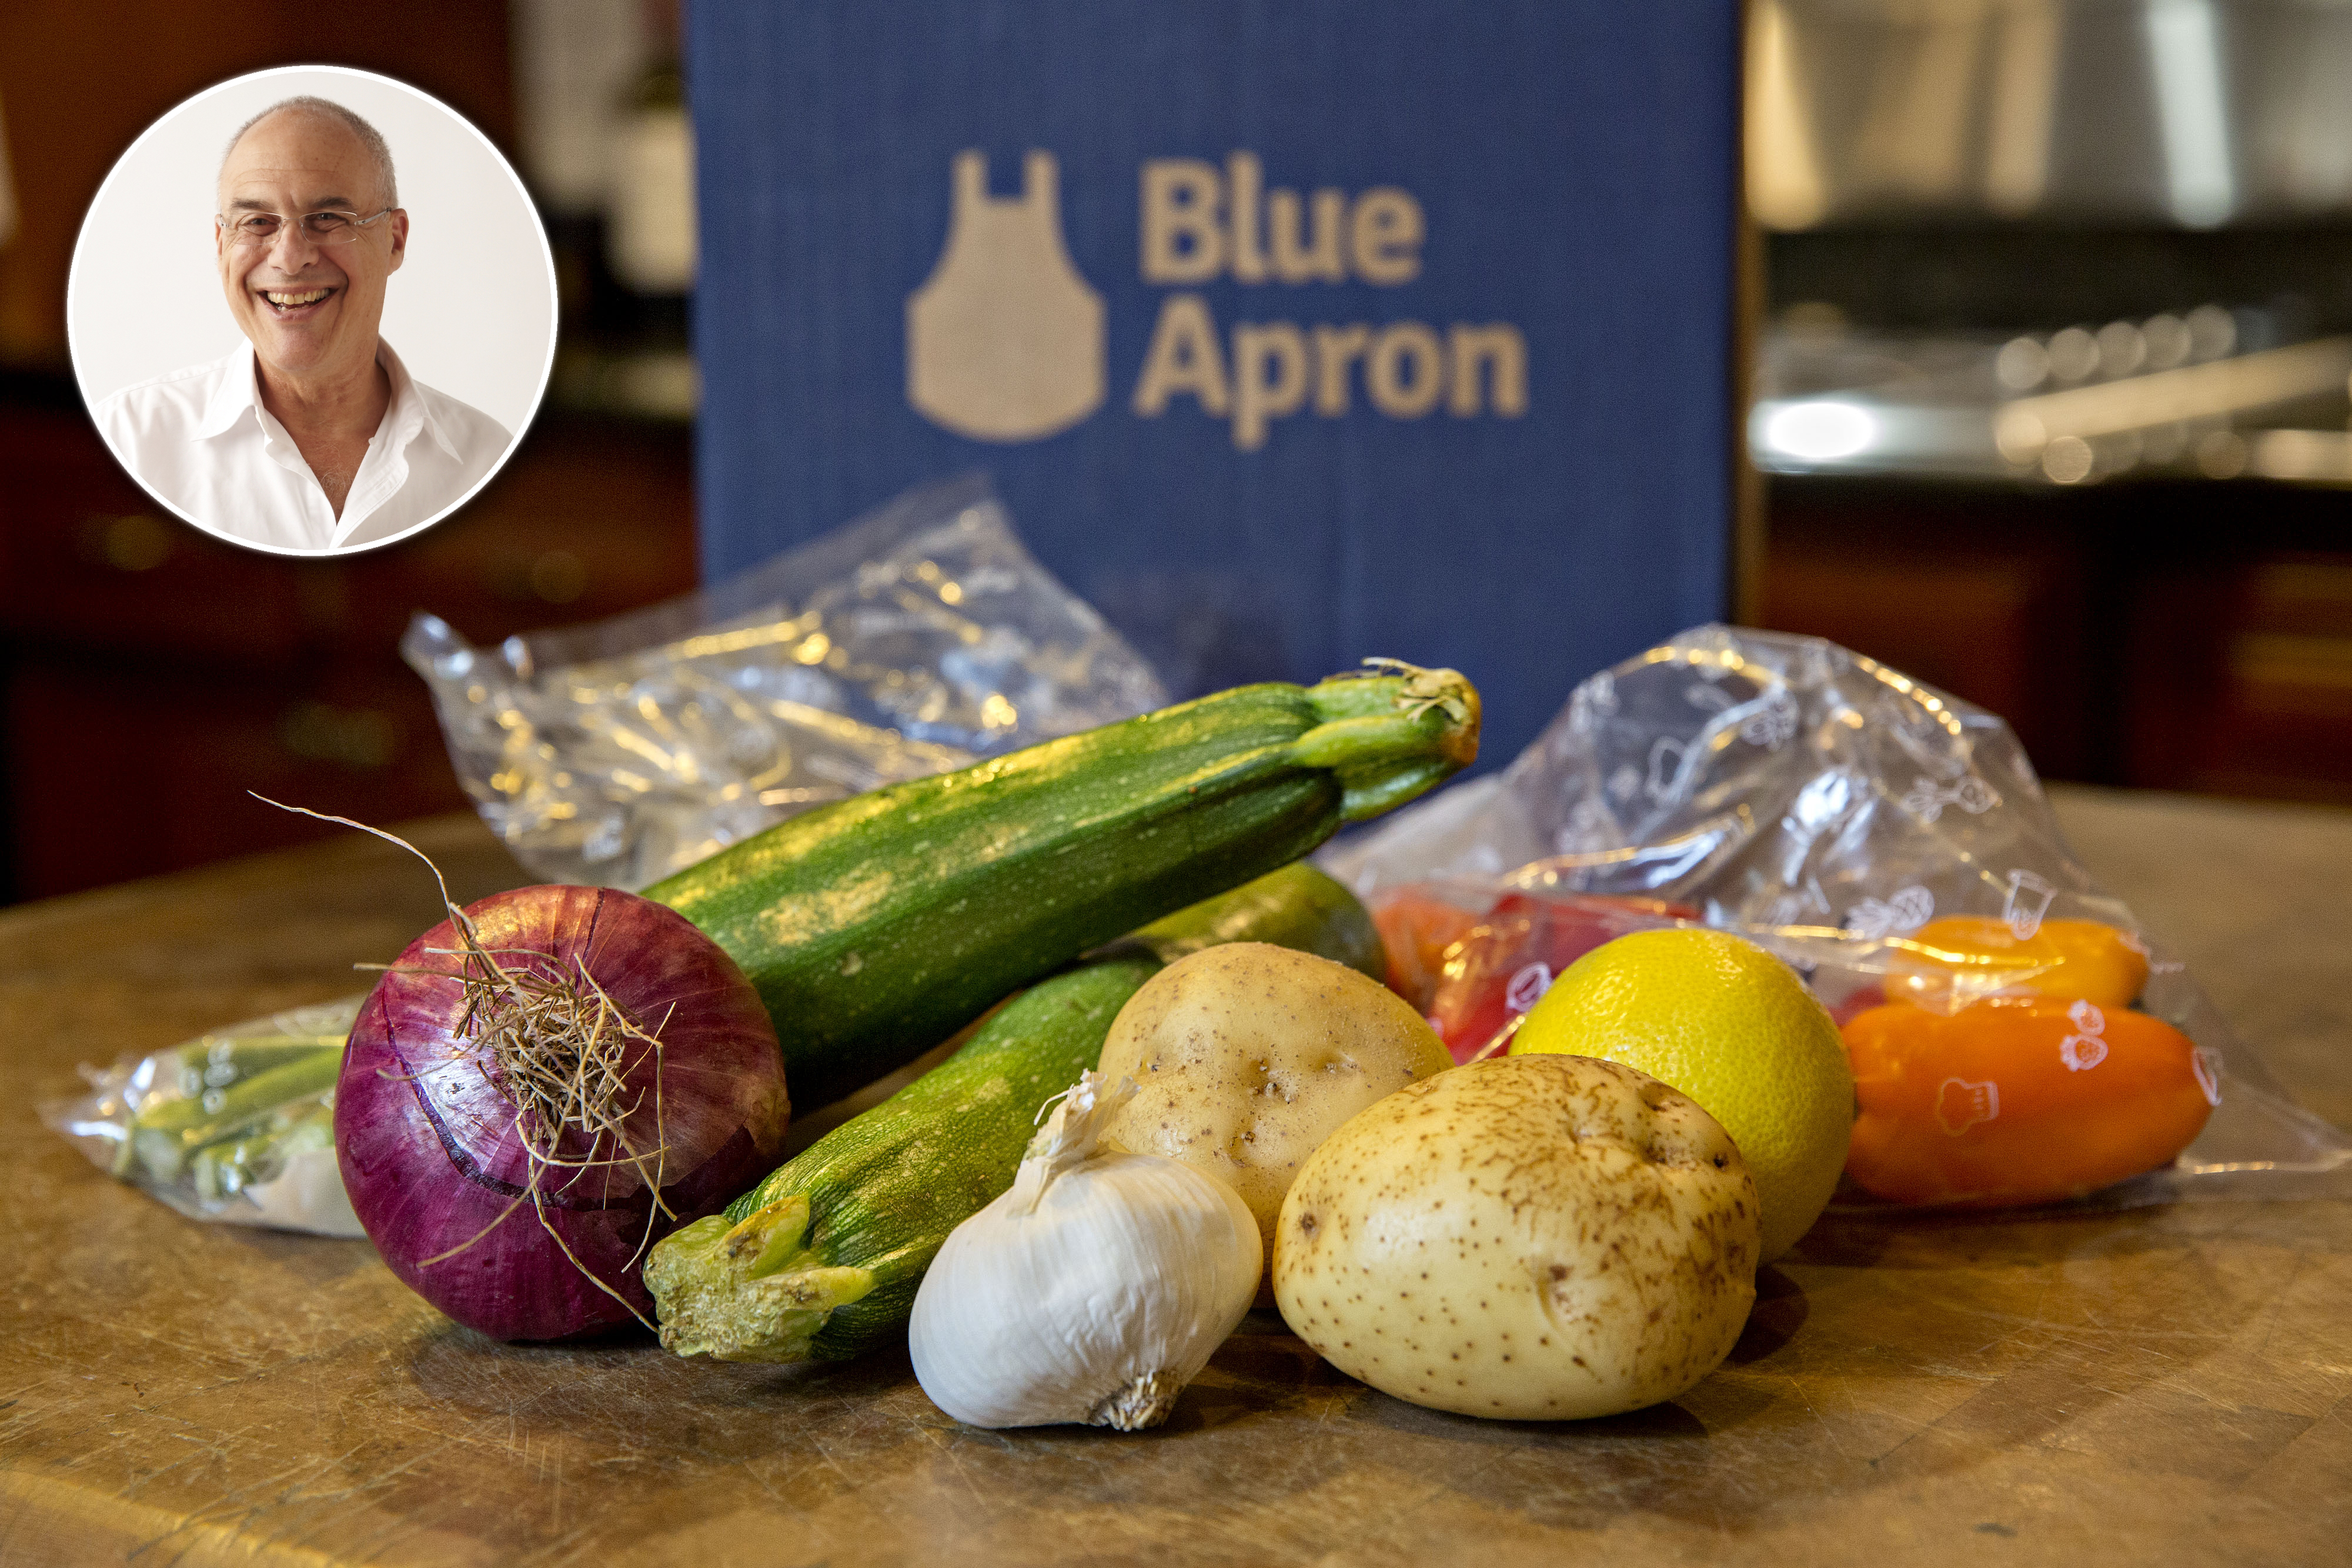 Mark Bittman: Here's Why Meal Kits Like Blue Apron Are a Waste of Your Money